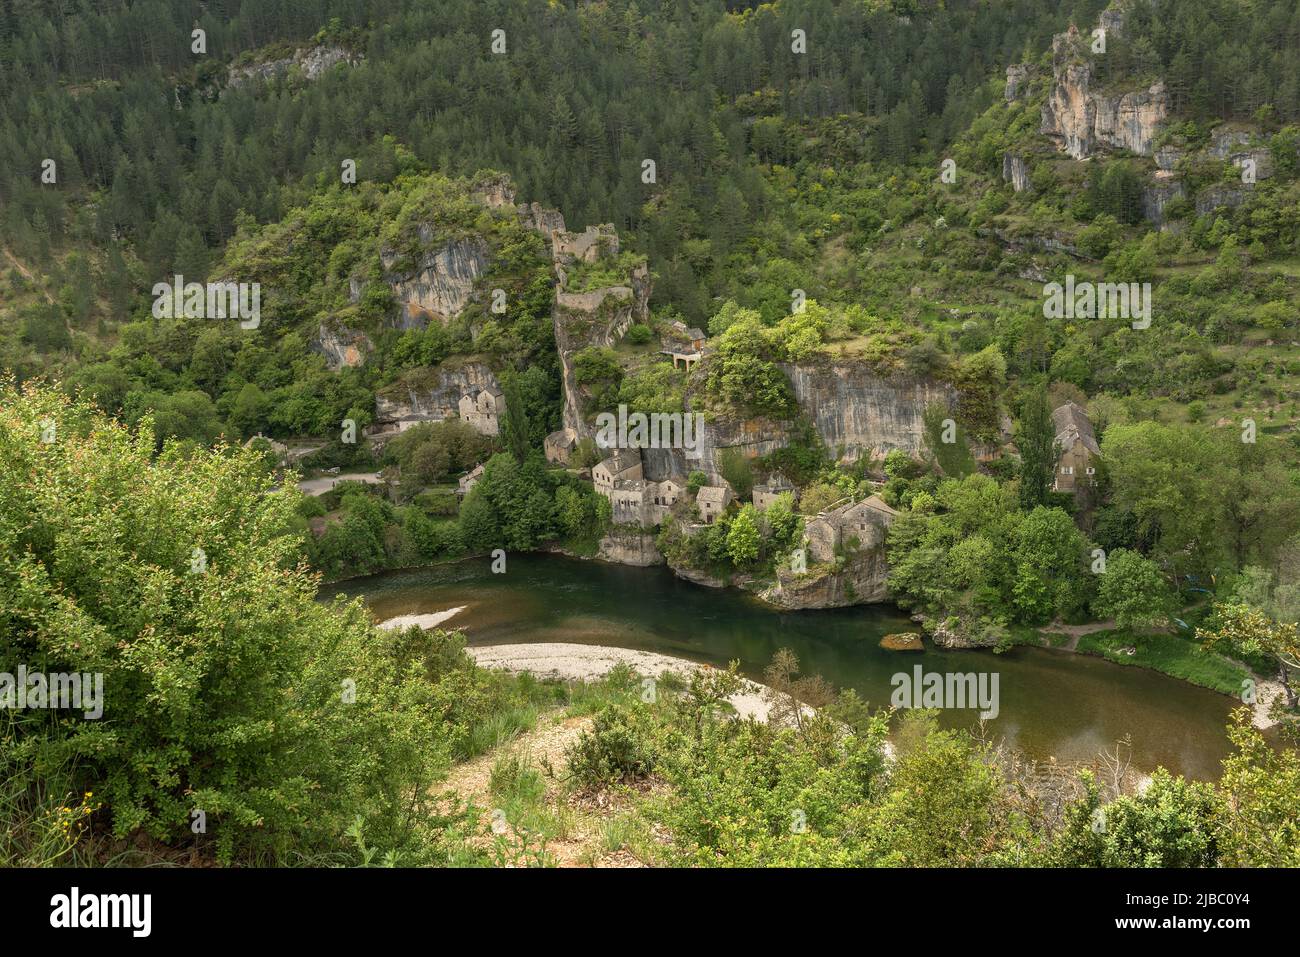 Village of Castelbouc in the Tarn Gorges, France Stock Photo